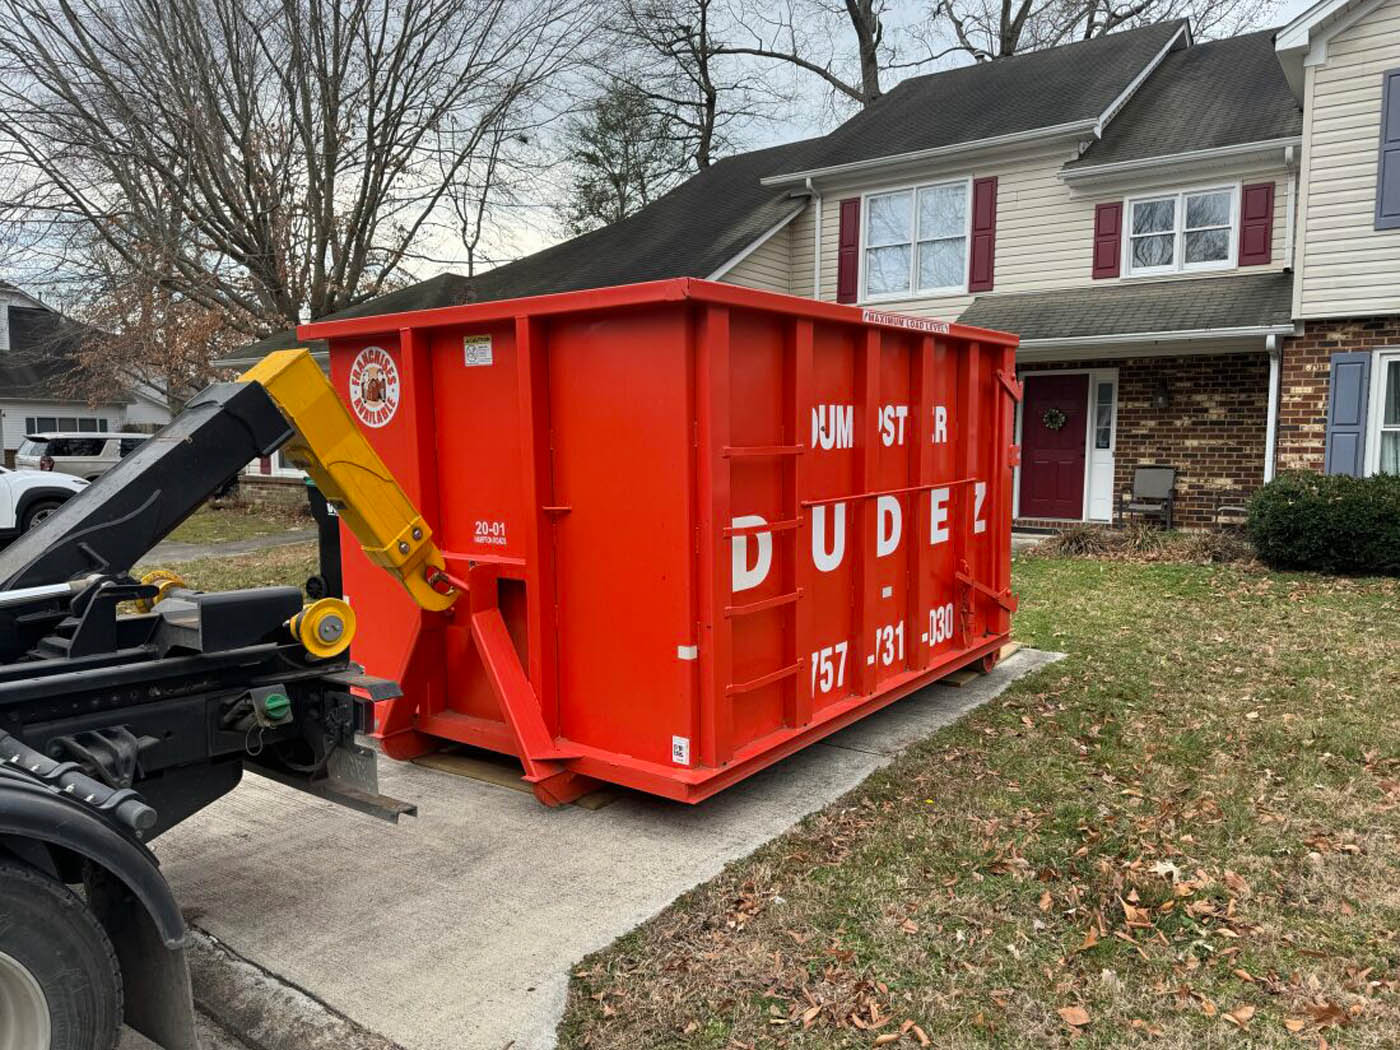 
				A roll-off dumpster from Dumpster Dudez parked in a home's driveway.
			